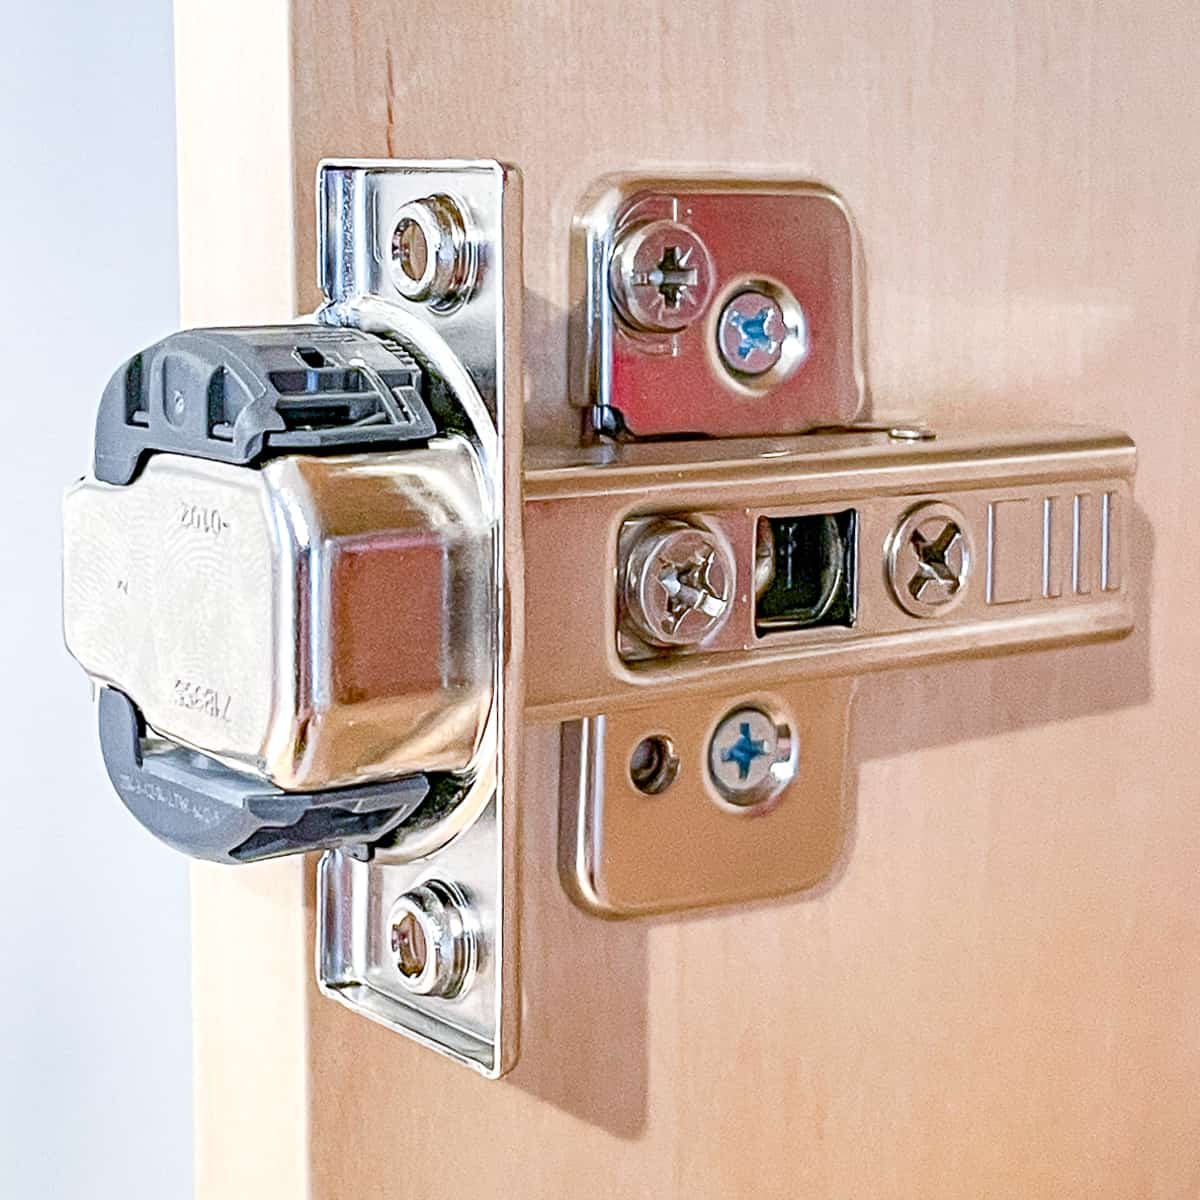 How to Install Cabinet Hinges - HingeOutlet